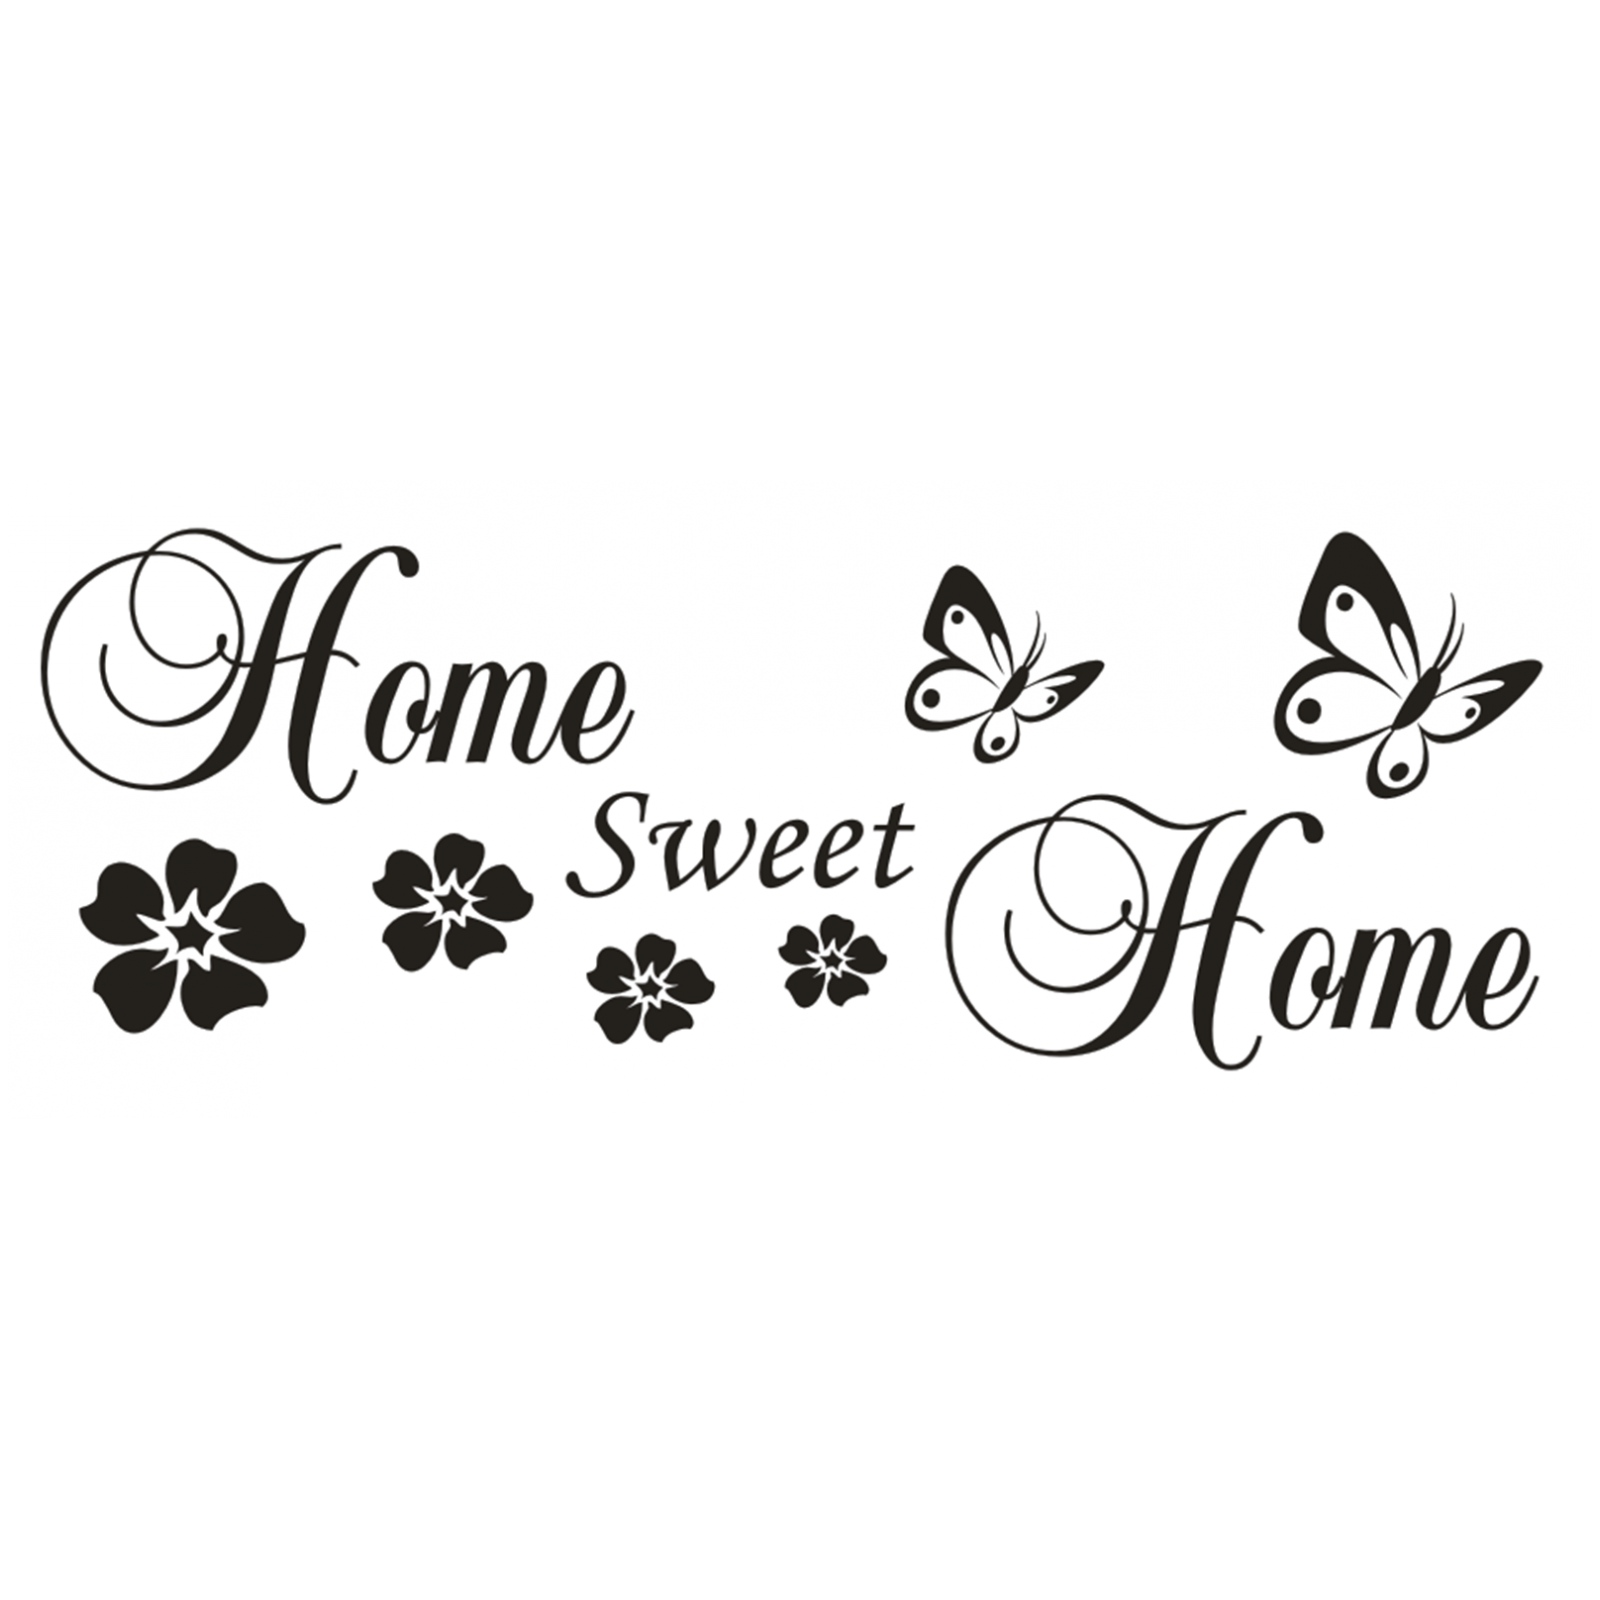 30++ Home sweet home spruch info